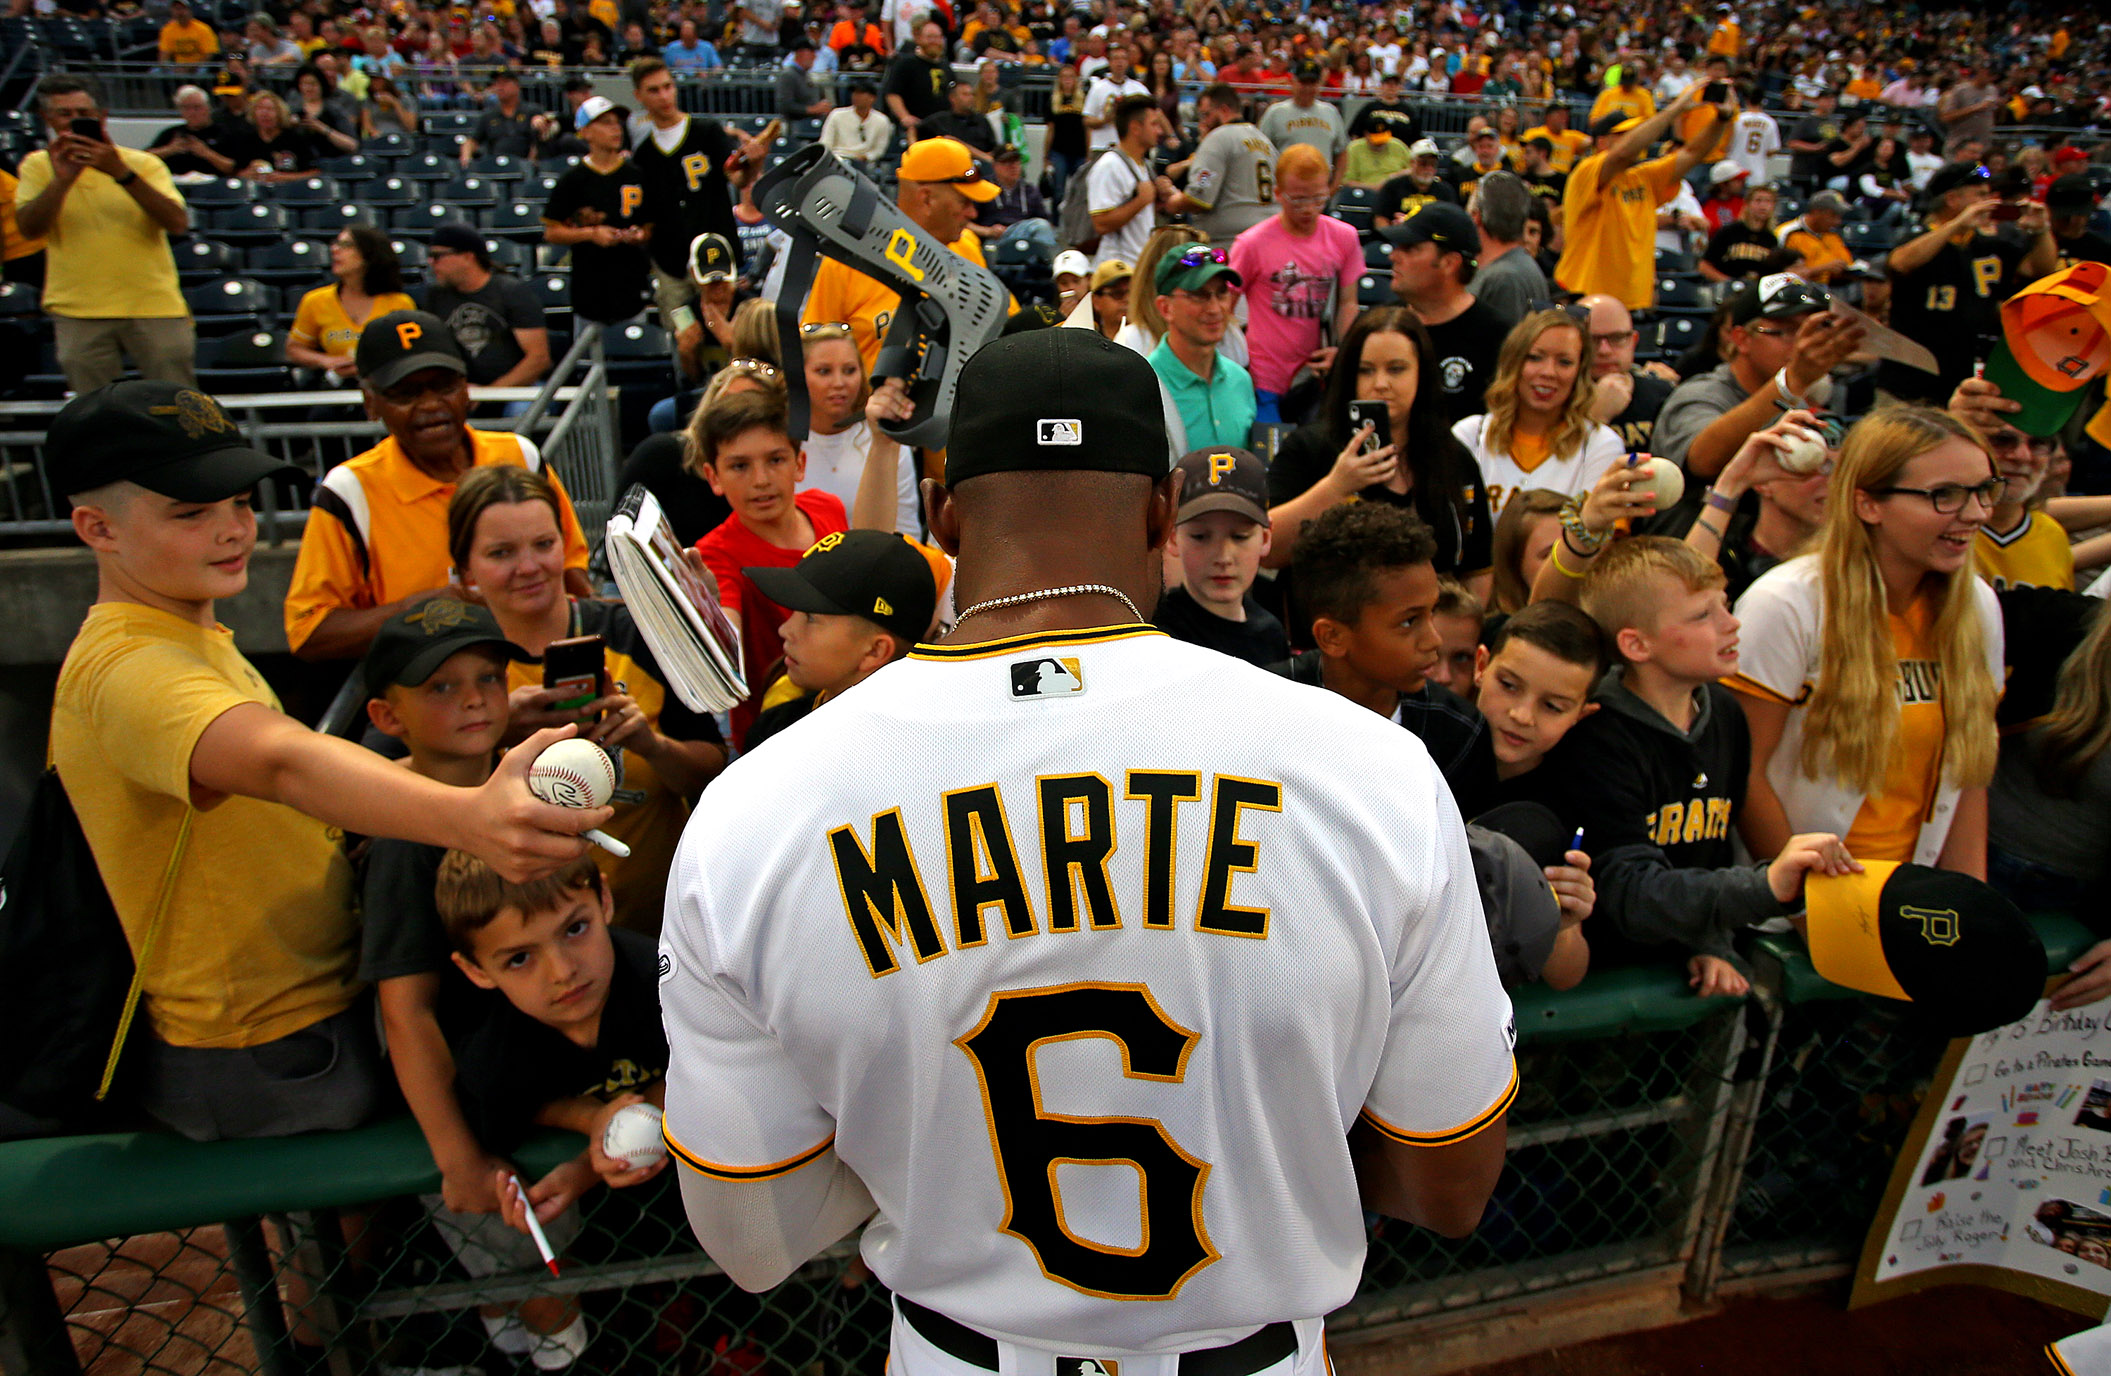 MLBPA Files Grievance Against Pirates, Rays And Marlins, Again, For Not